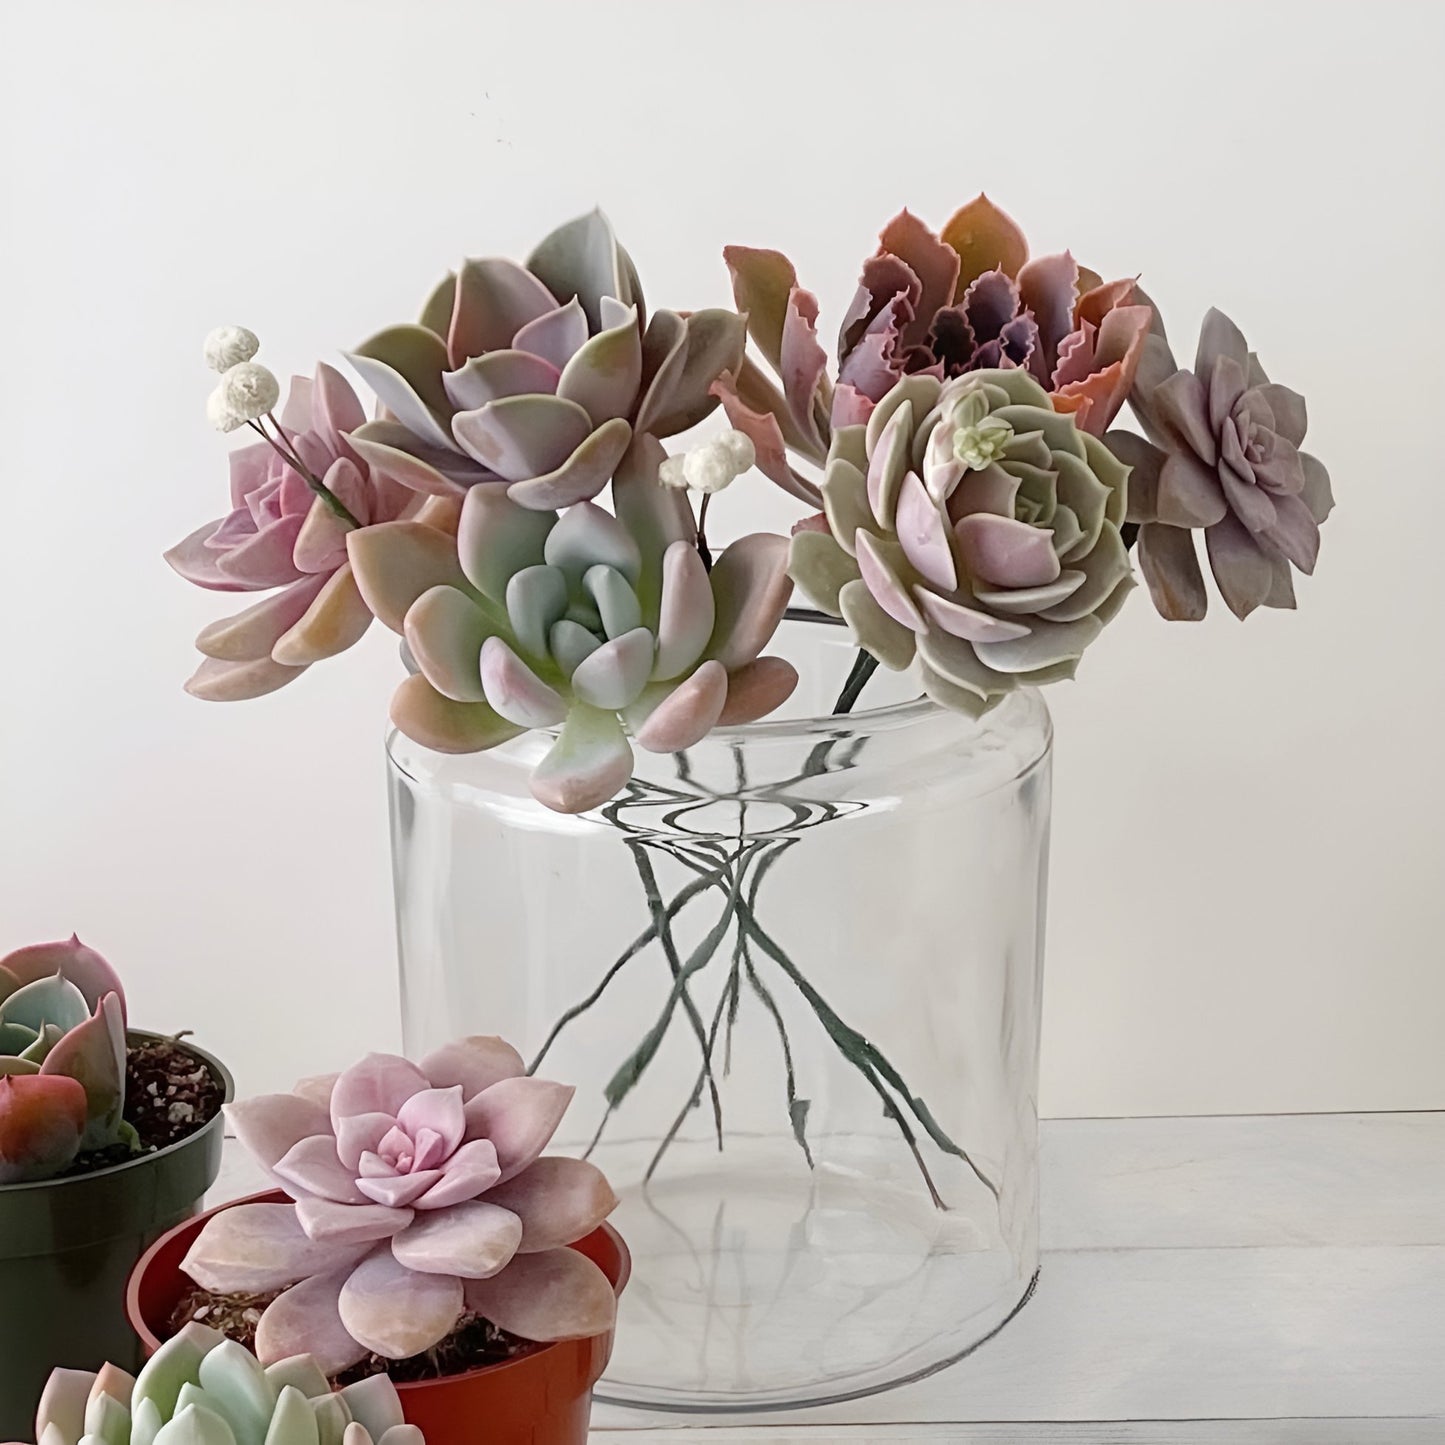 4” Succulents with Prepared Wire Stems for DIY Floral